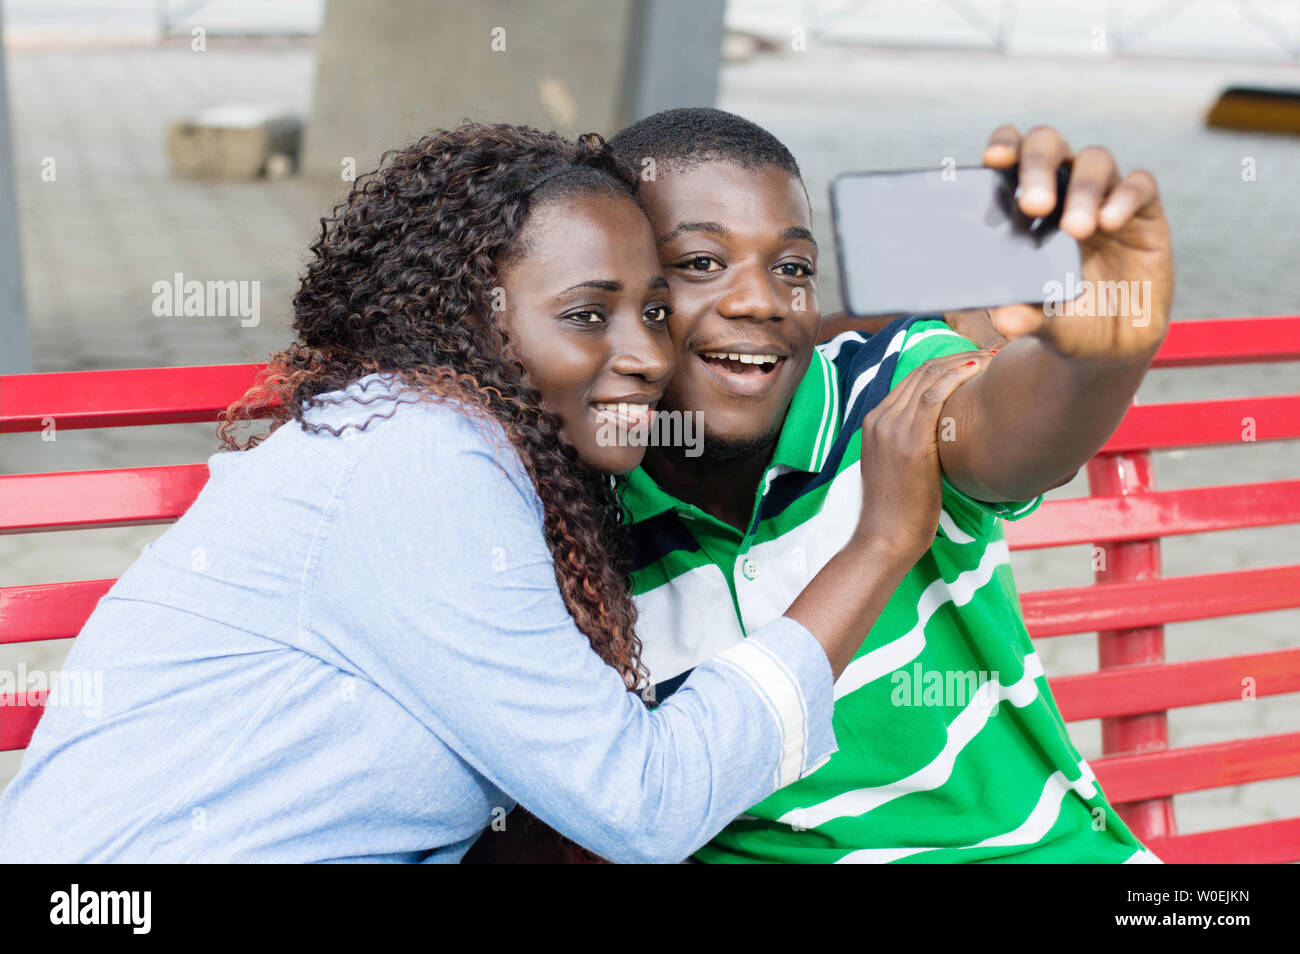 young couple takes pictures to mark their ride in the public square. Stock Photo